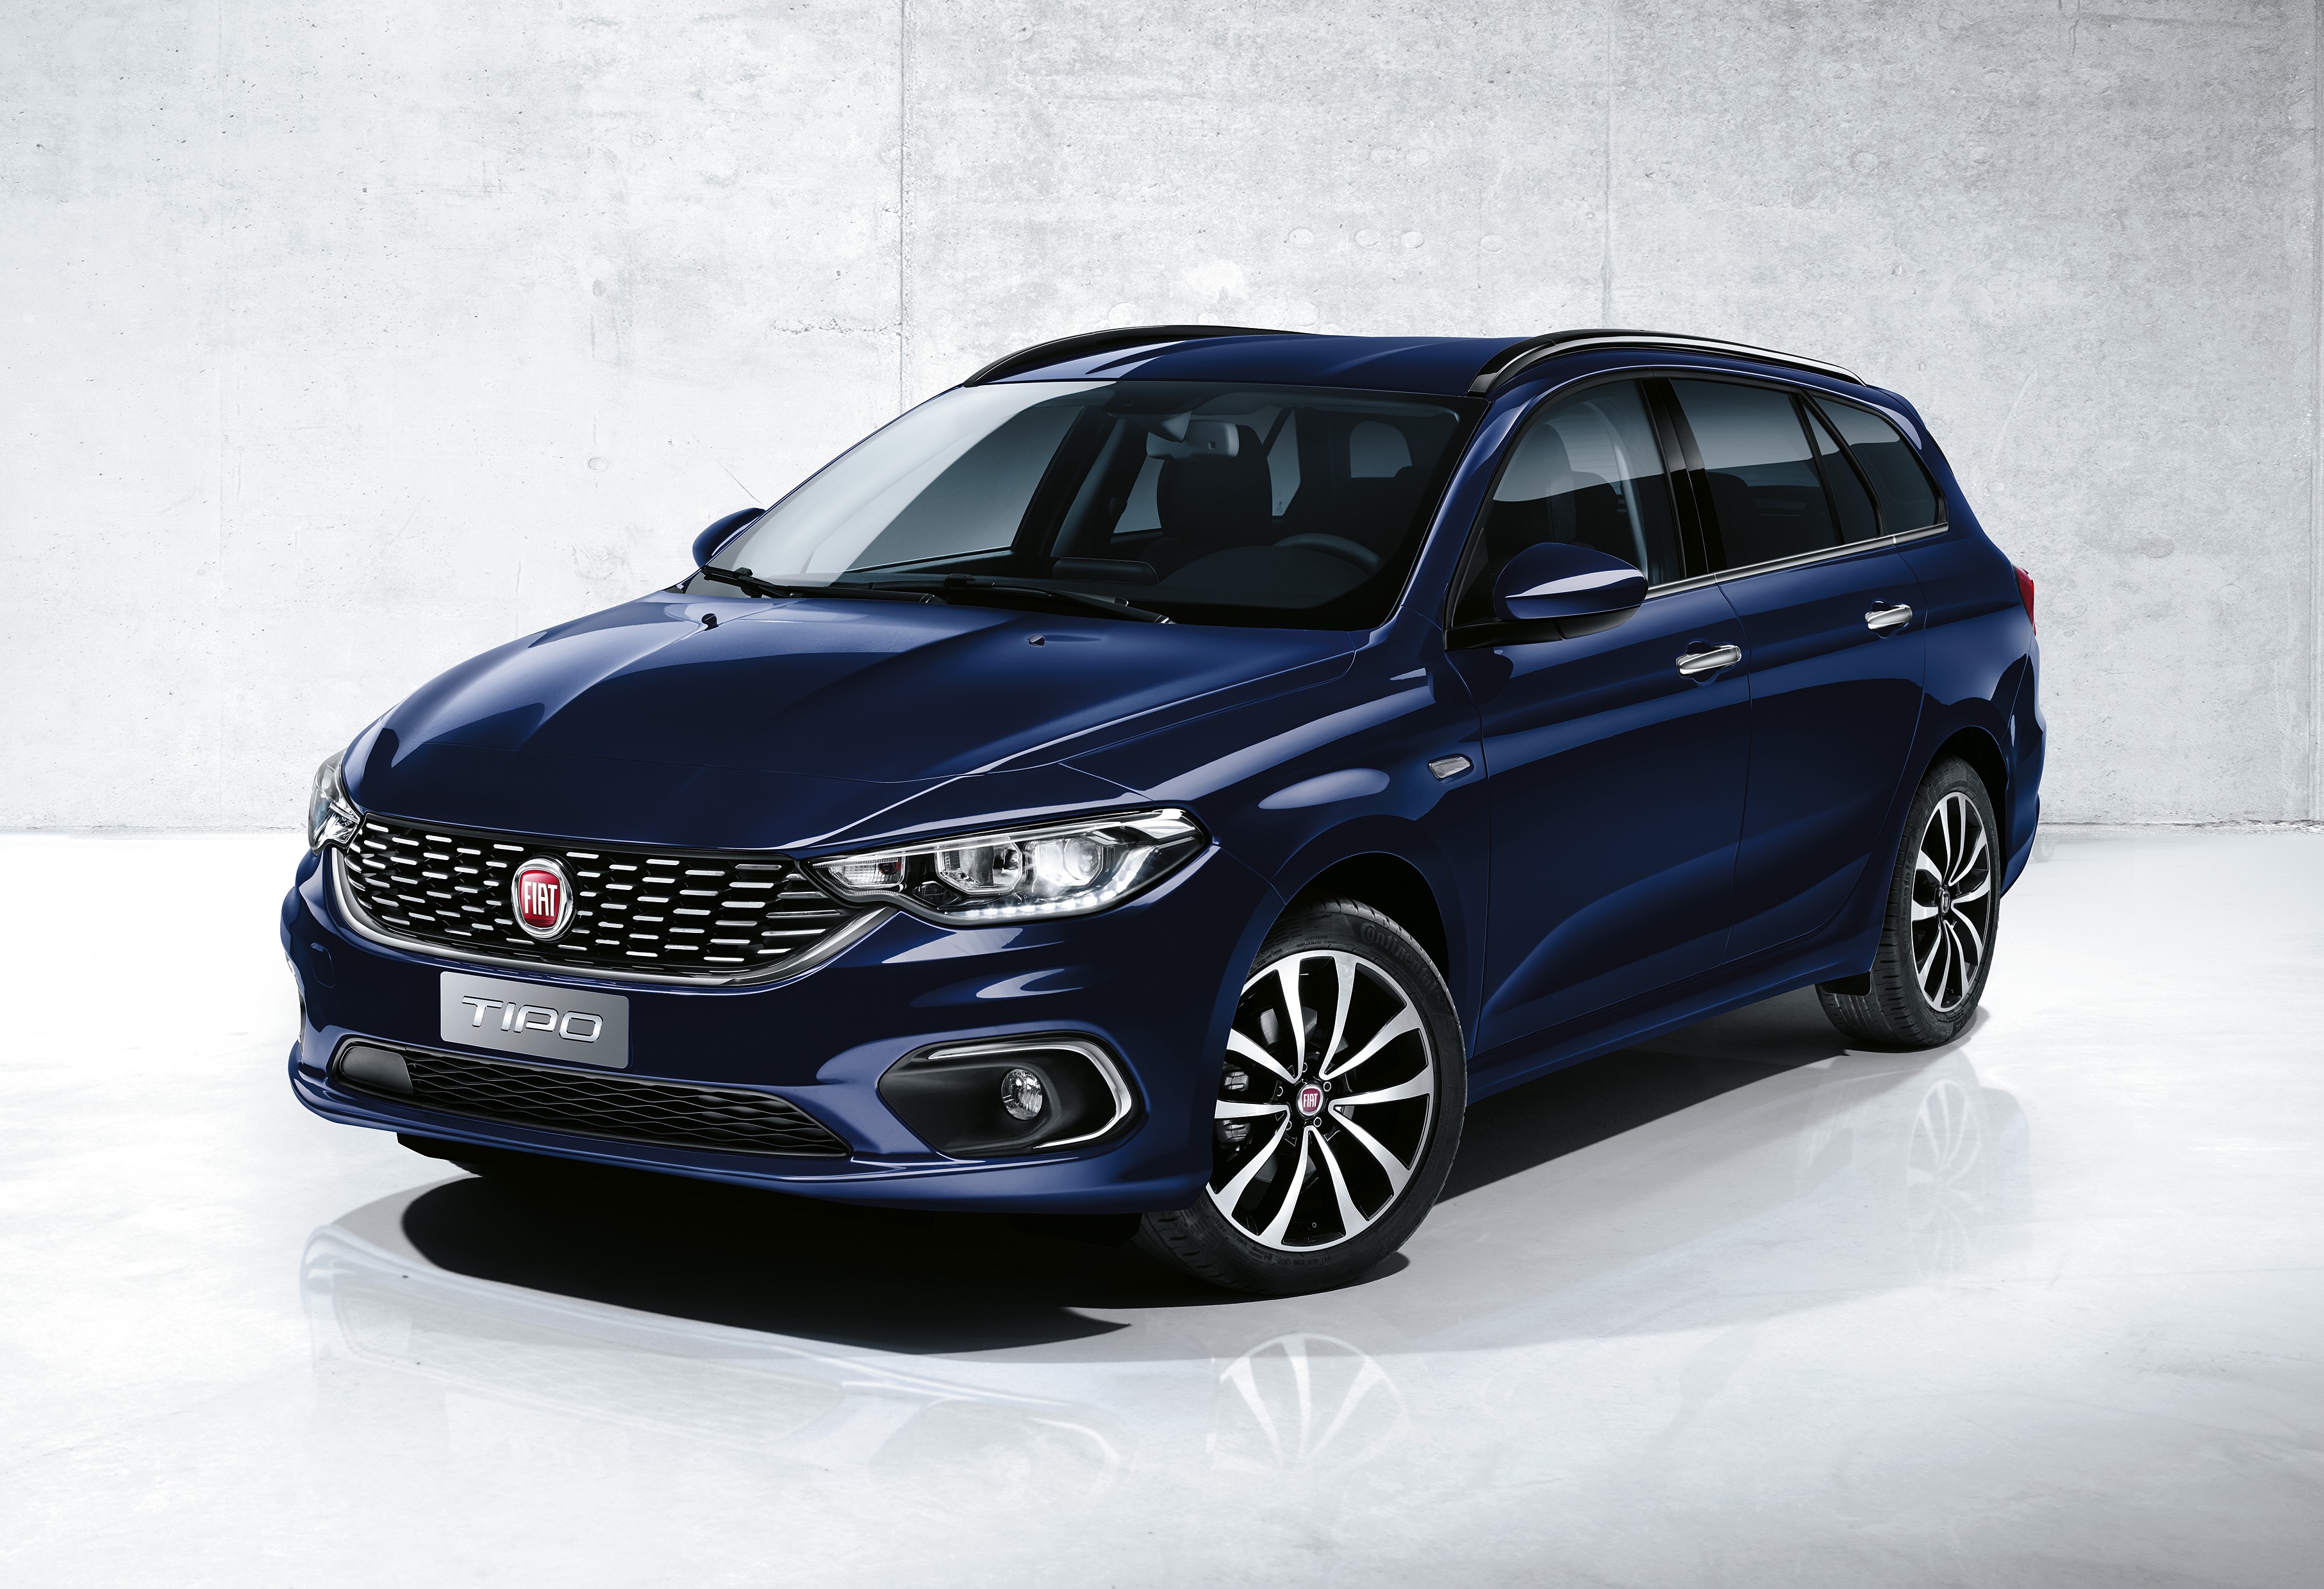 Fiat Tipo Hatchback reviews 2016